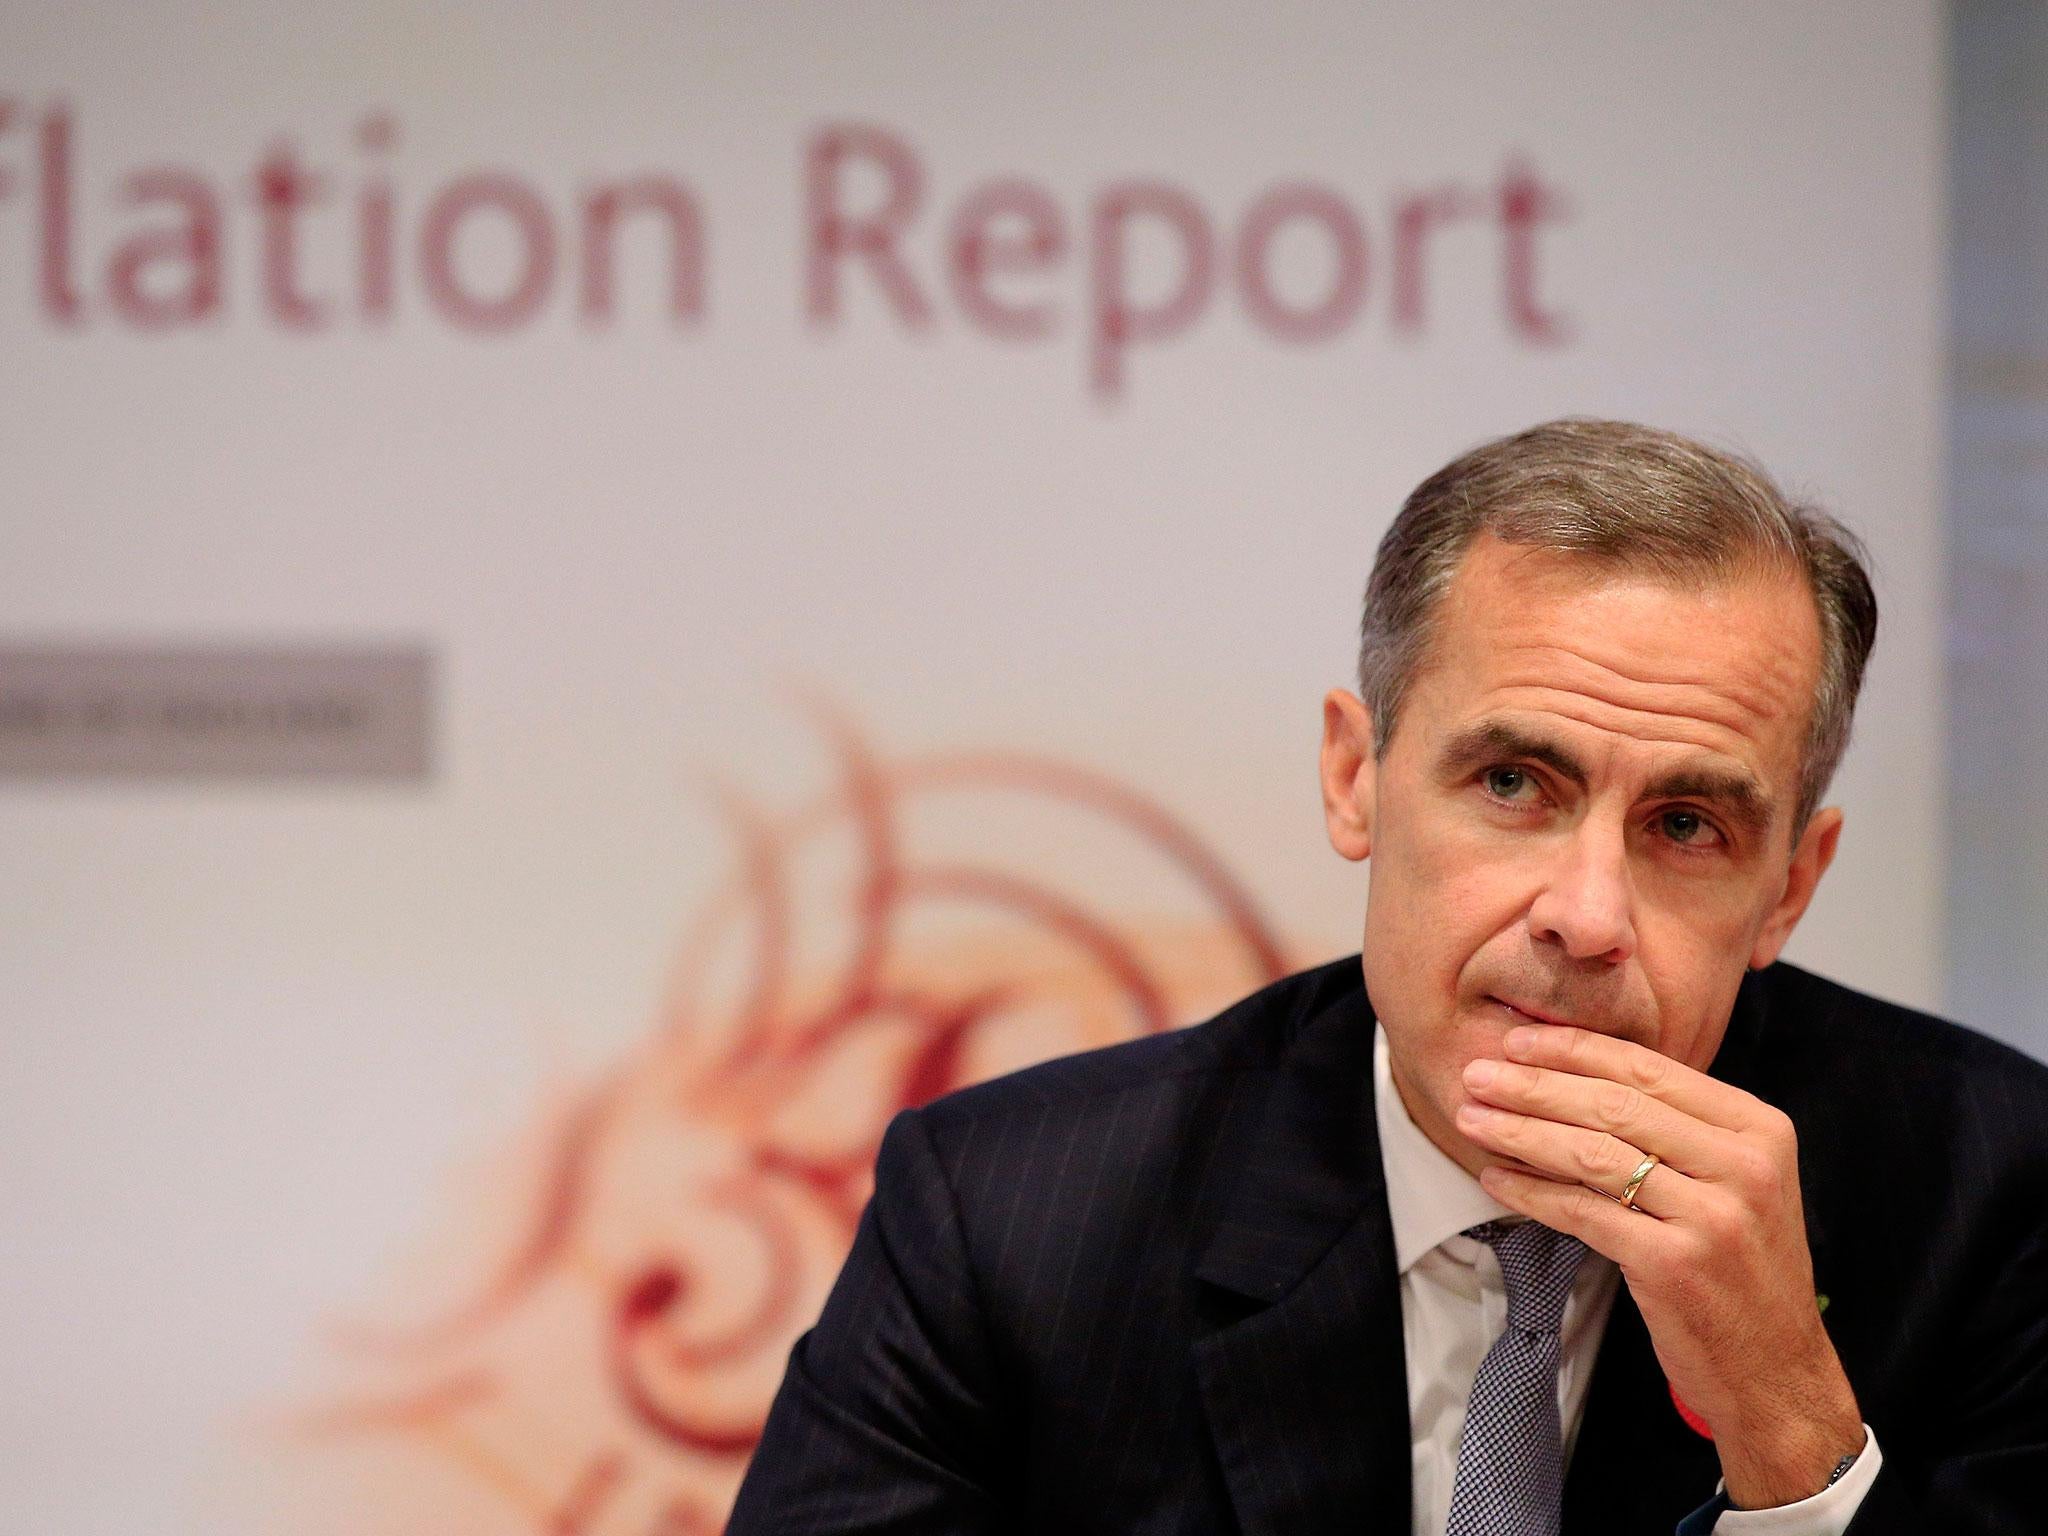 Mark Carney, governor of the Bank of England, appeared before MPs on the Treasury Select Committee on Tuesday